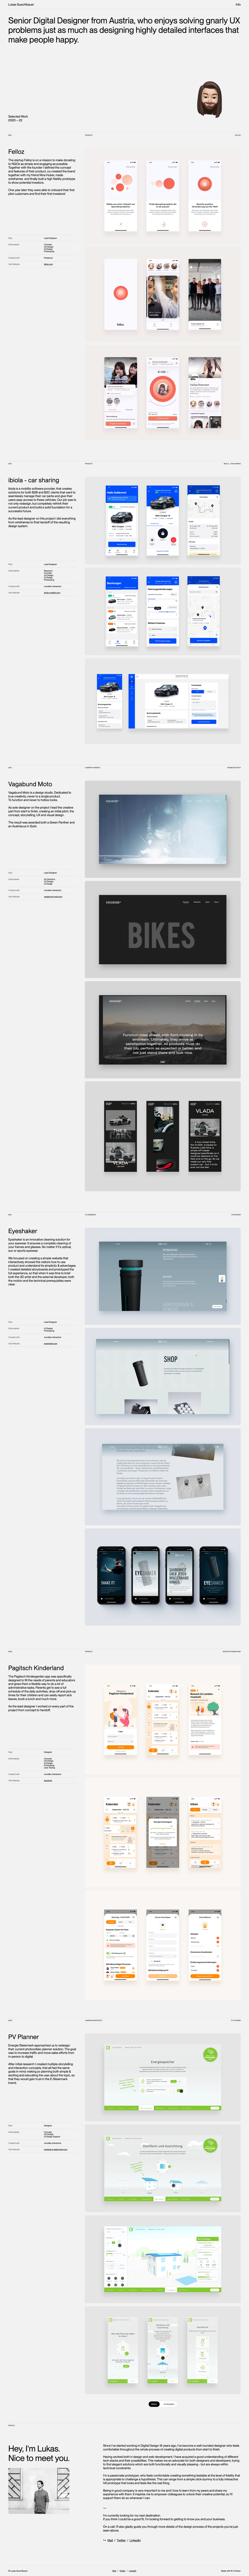 Lukas Guschlbauer Landing Page Example: Senior Digital Designer from Austria, who enjoys solving gnarly UX problems just as much as designing highly detailed interfaces that make people happy.